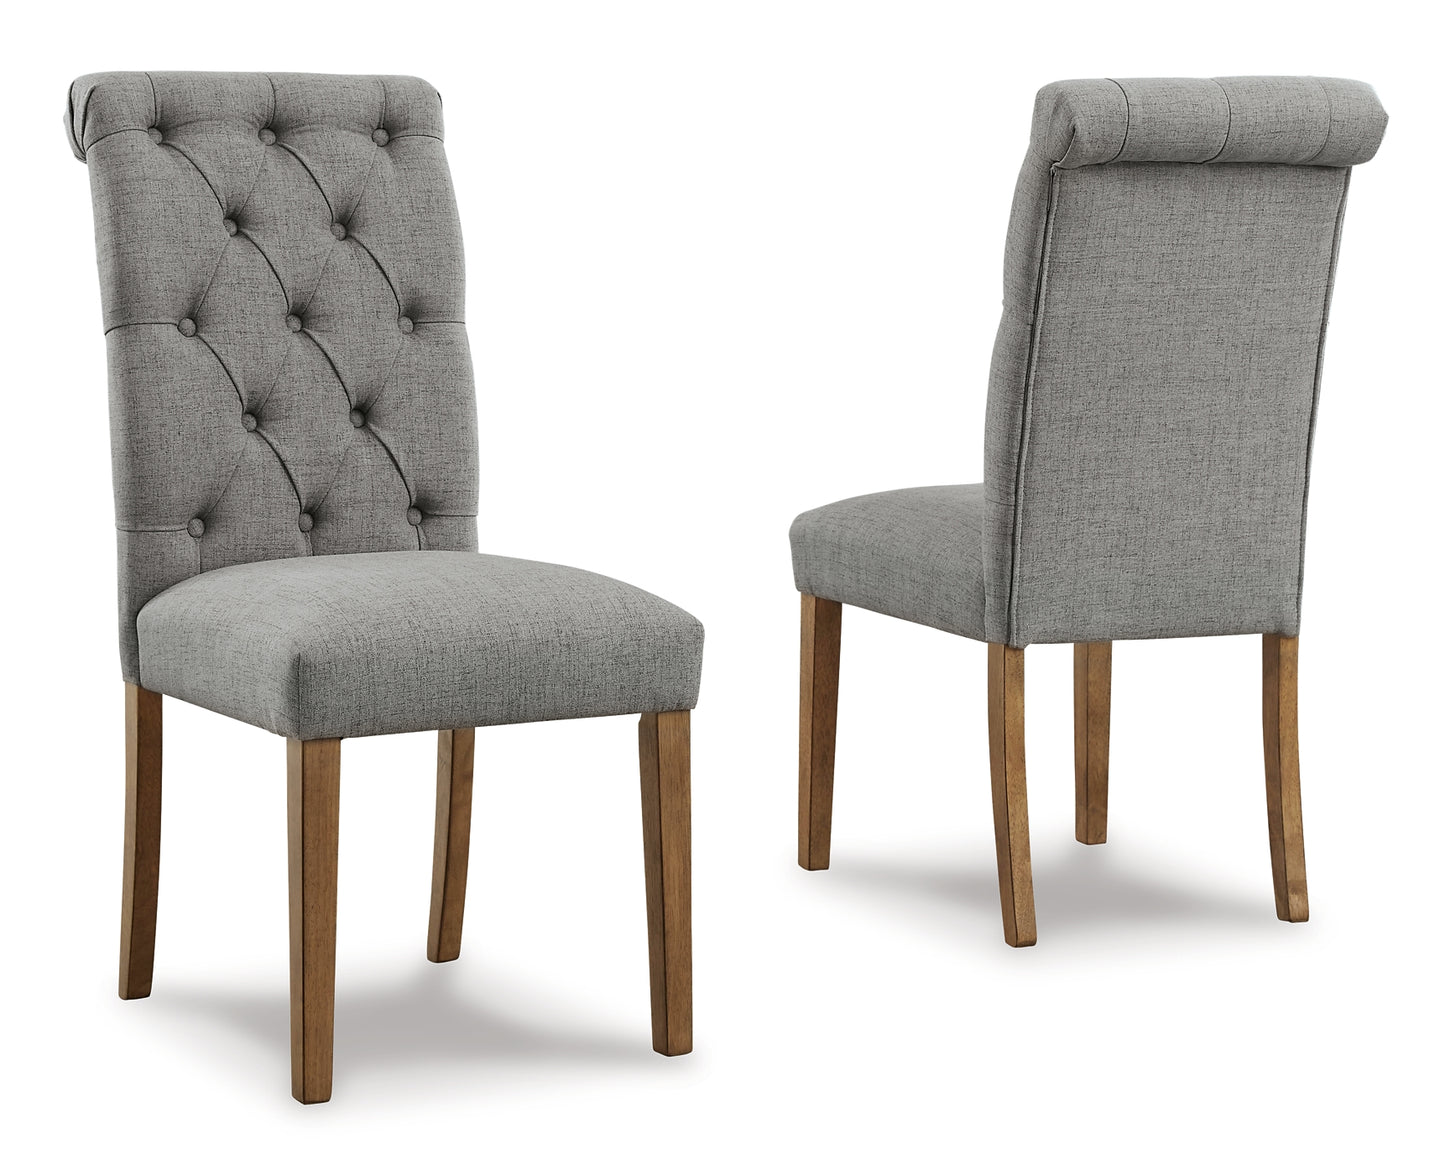 Harvina Dining Chair (Set of 2) Signature Design by Ashley®